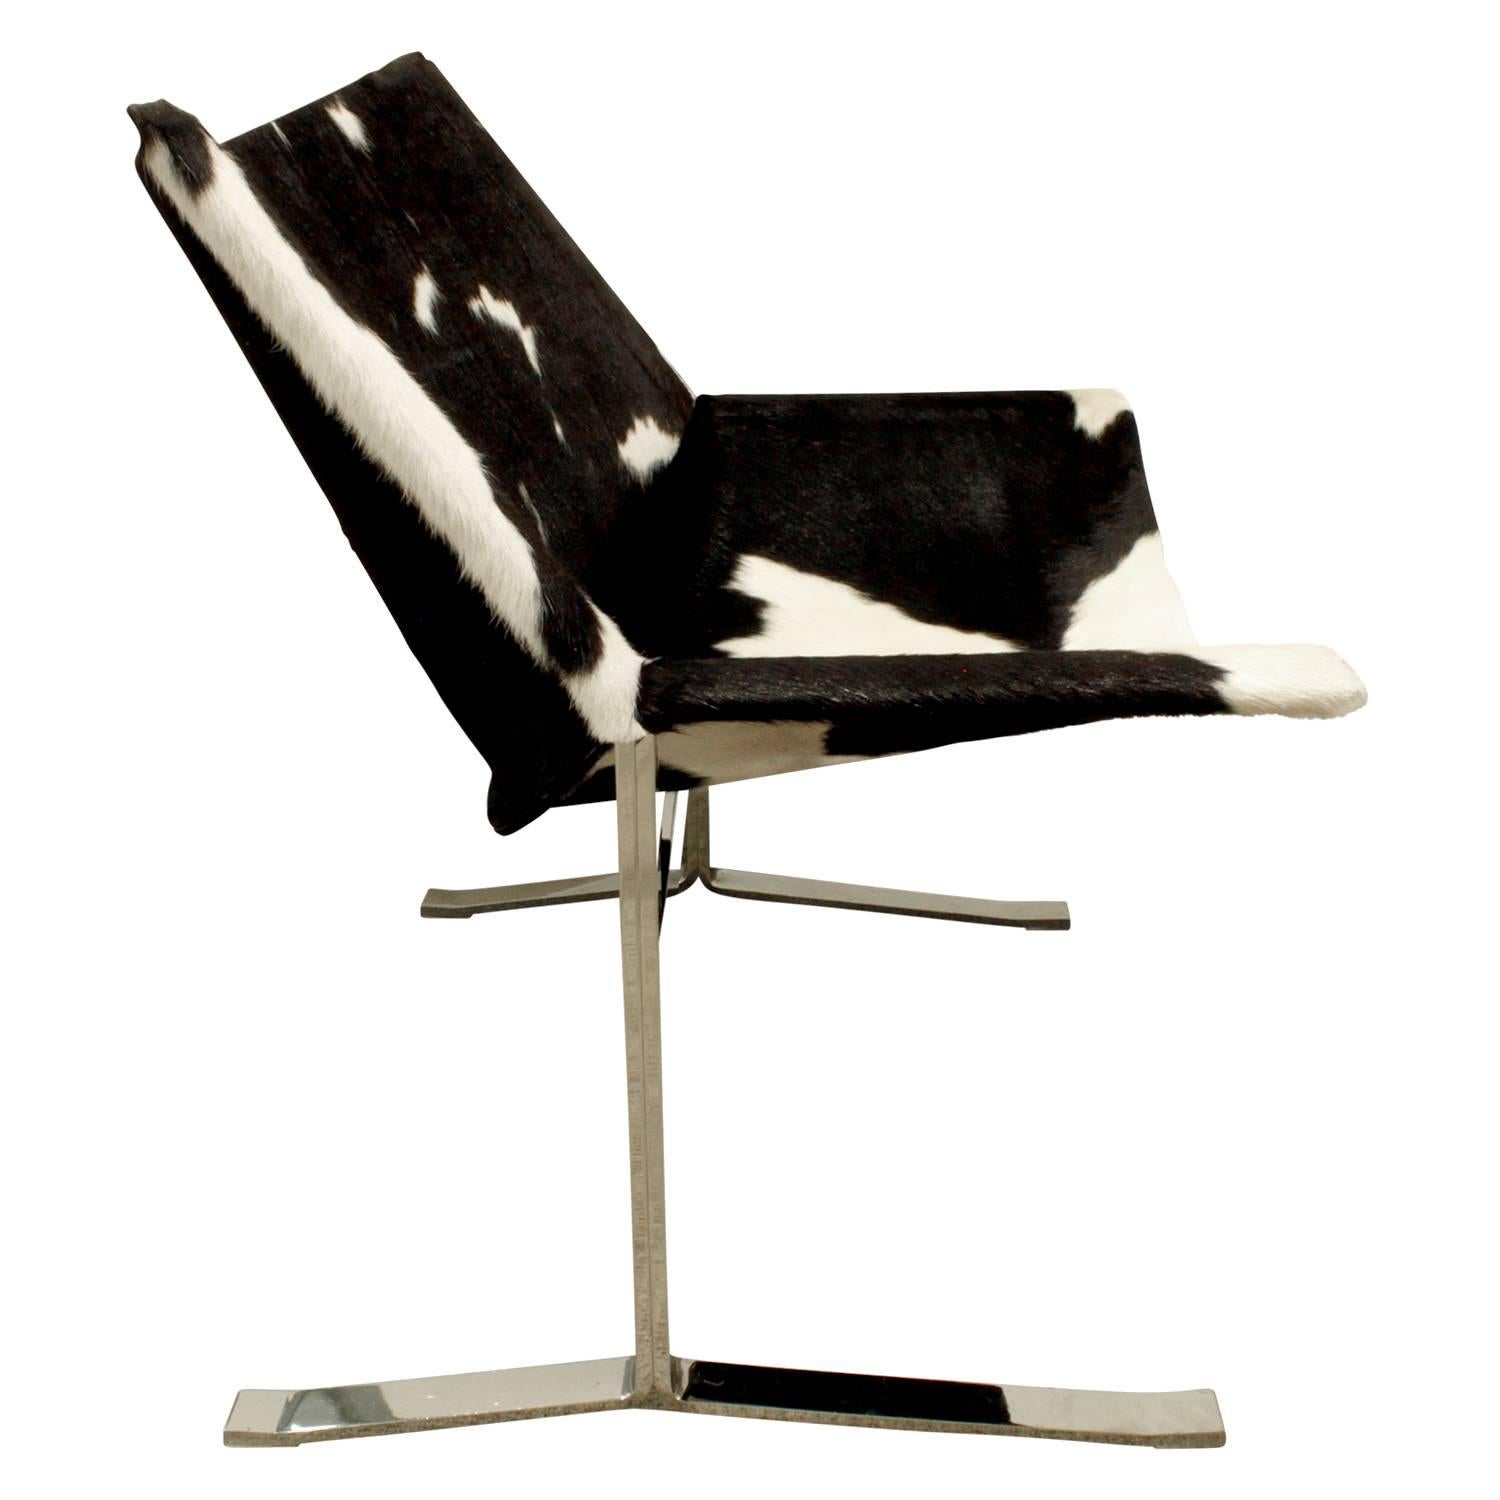 American Chic Pair of Sling Chairs in Steel with Cow Hides, 1963